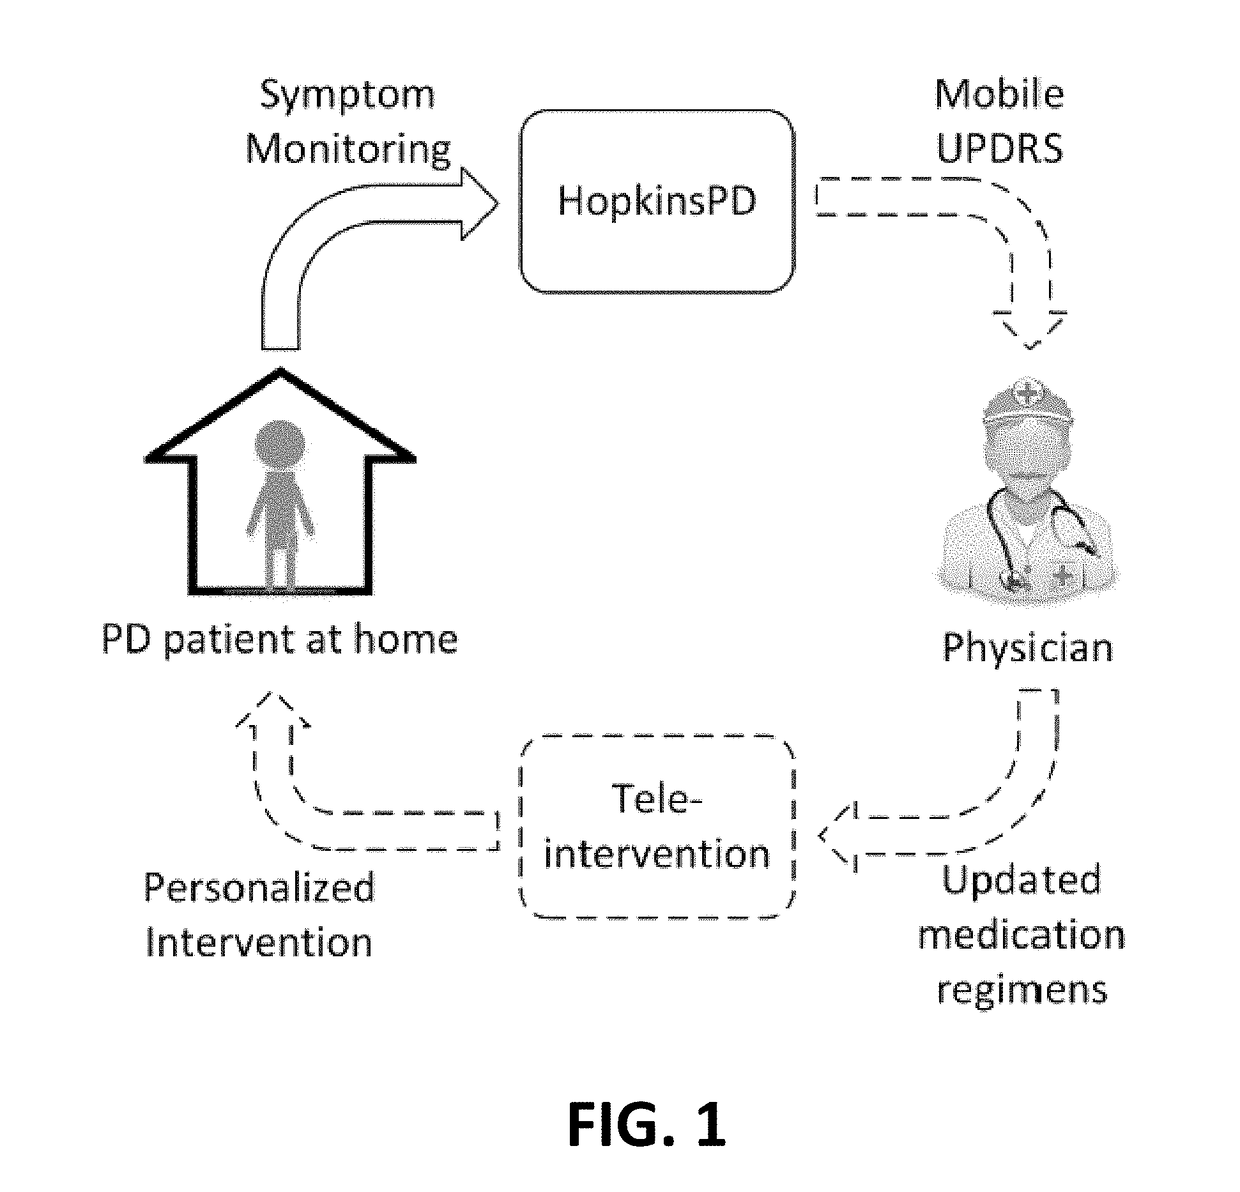 Measuring medication response using wearables for parkinson's disease